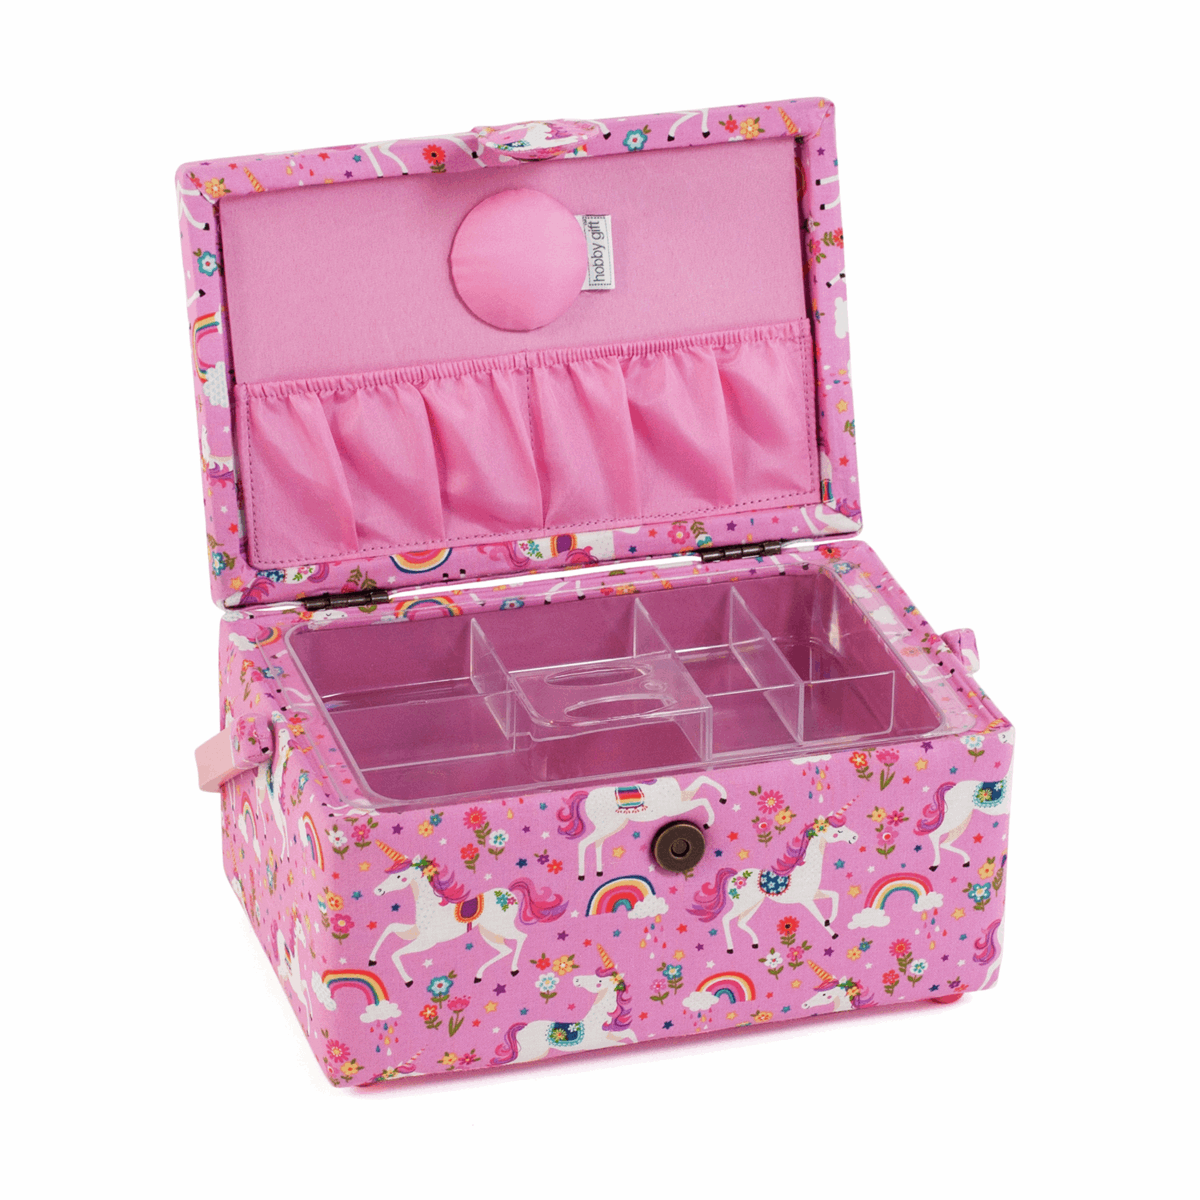 Magical Rectangle Sewing Box with Appliqué Lid - Medium